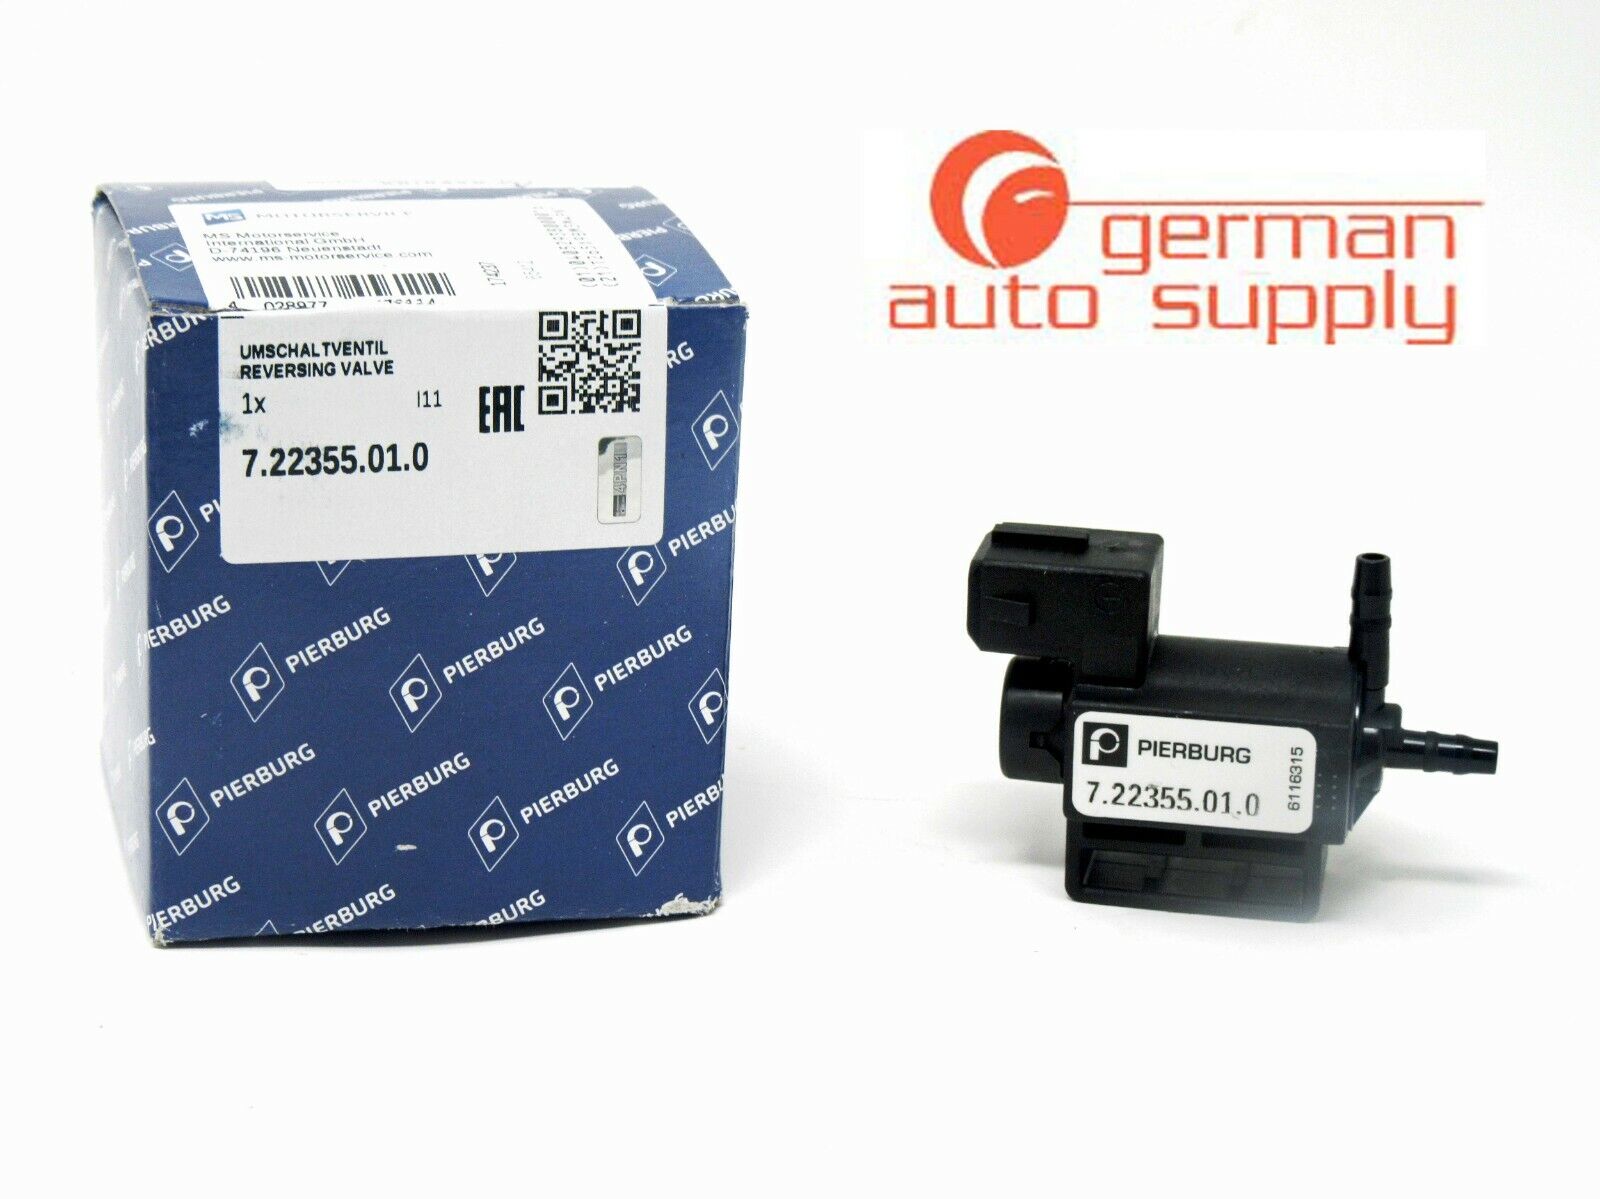 Mercedes-Benz Max 69% OFF Electronic trust Air Intake Change PIERBURG - Over Valve